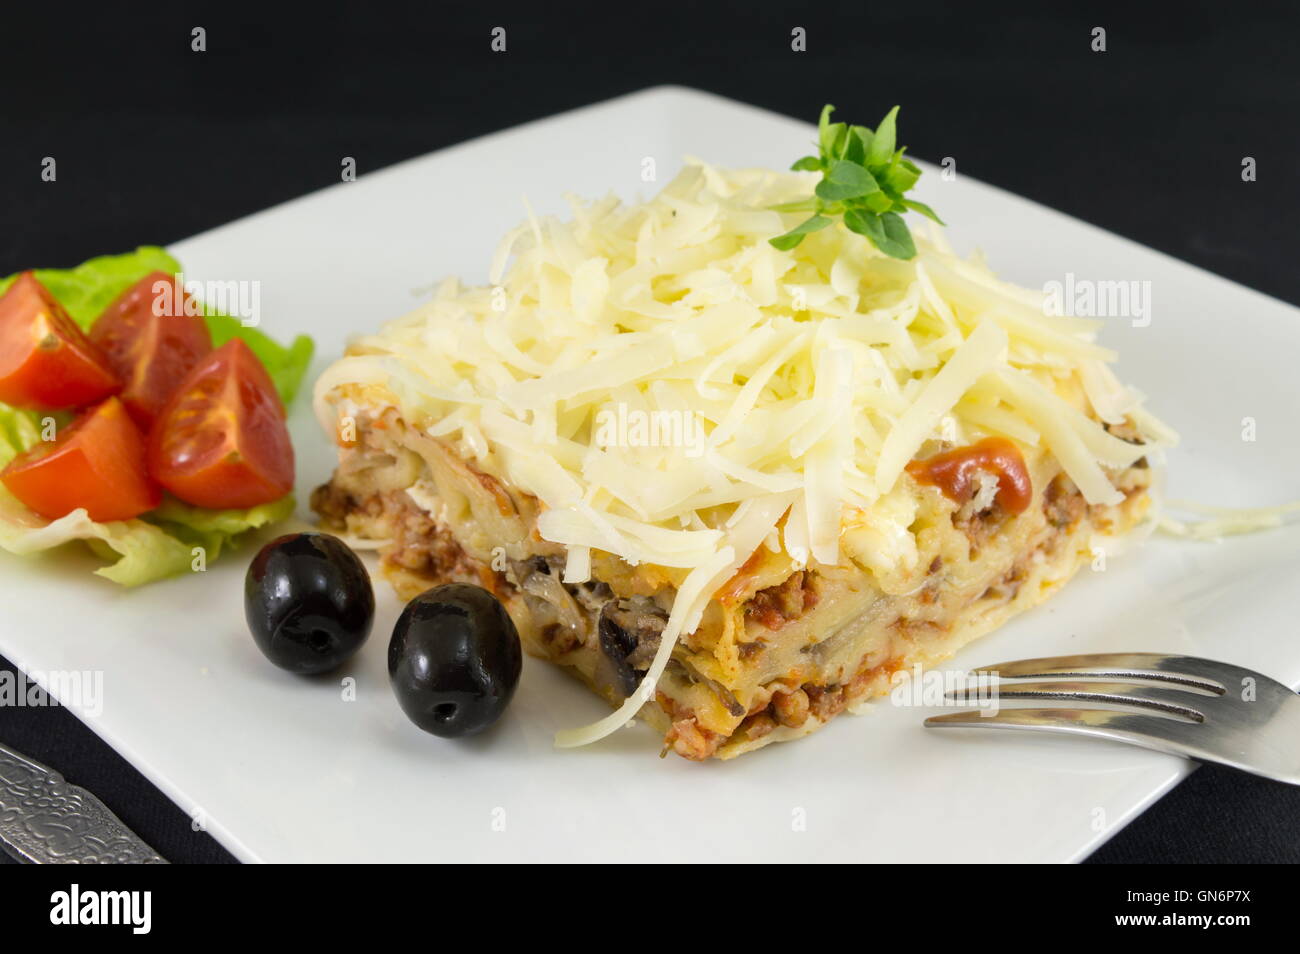 Lasagna portion served with fresh vegetables on a plate Stock Photo